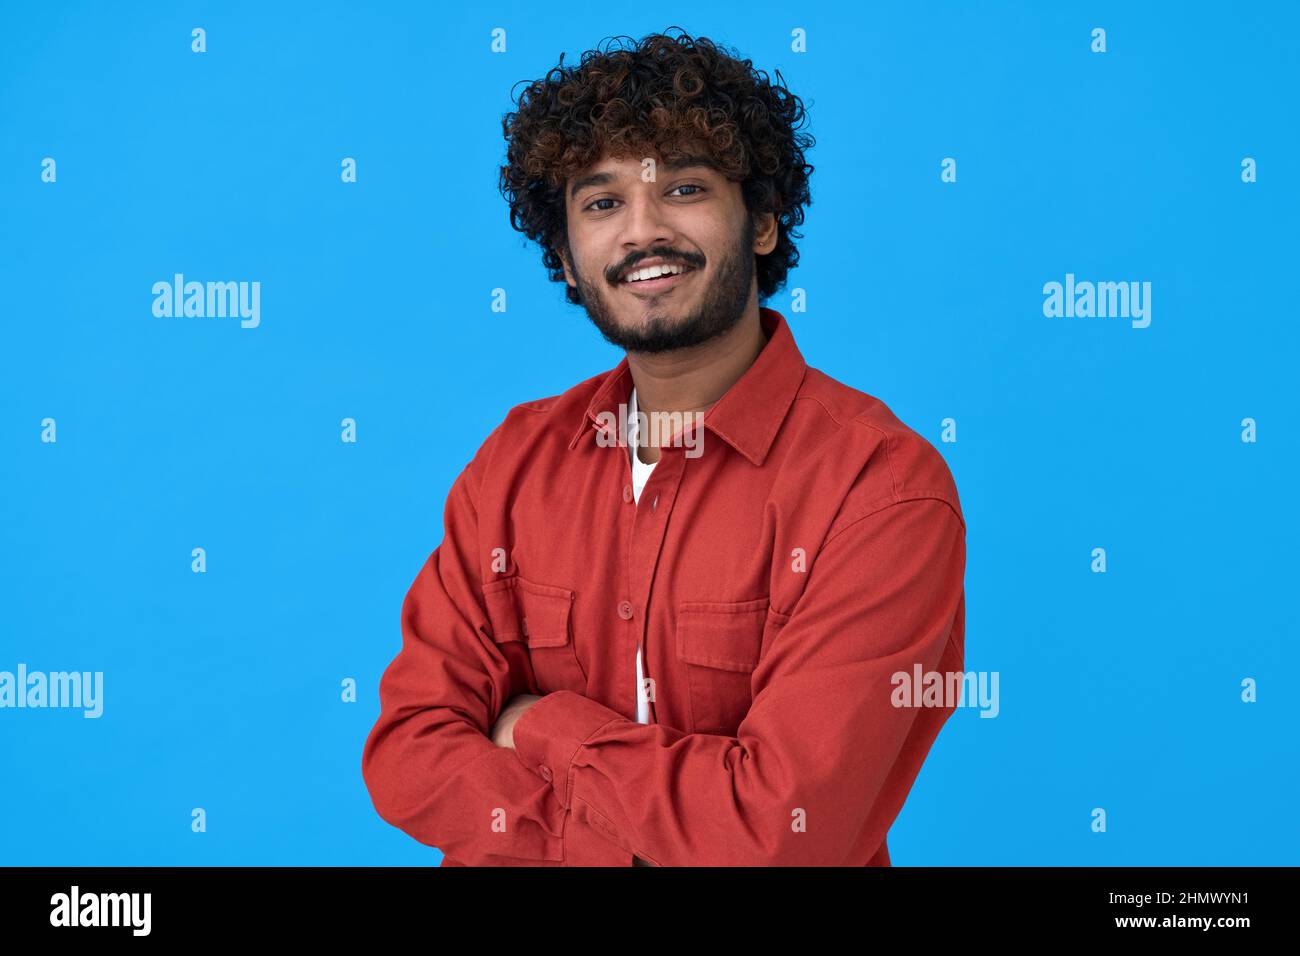 Smiling young indian guy standing isolated on blue background. Stock Photo